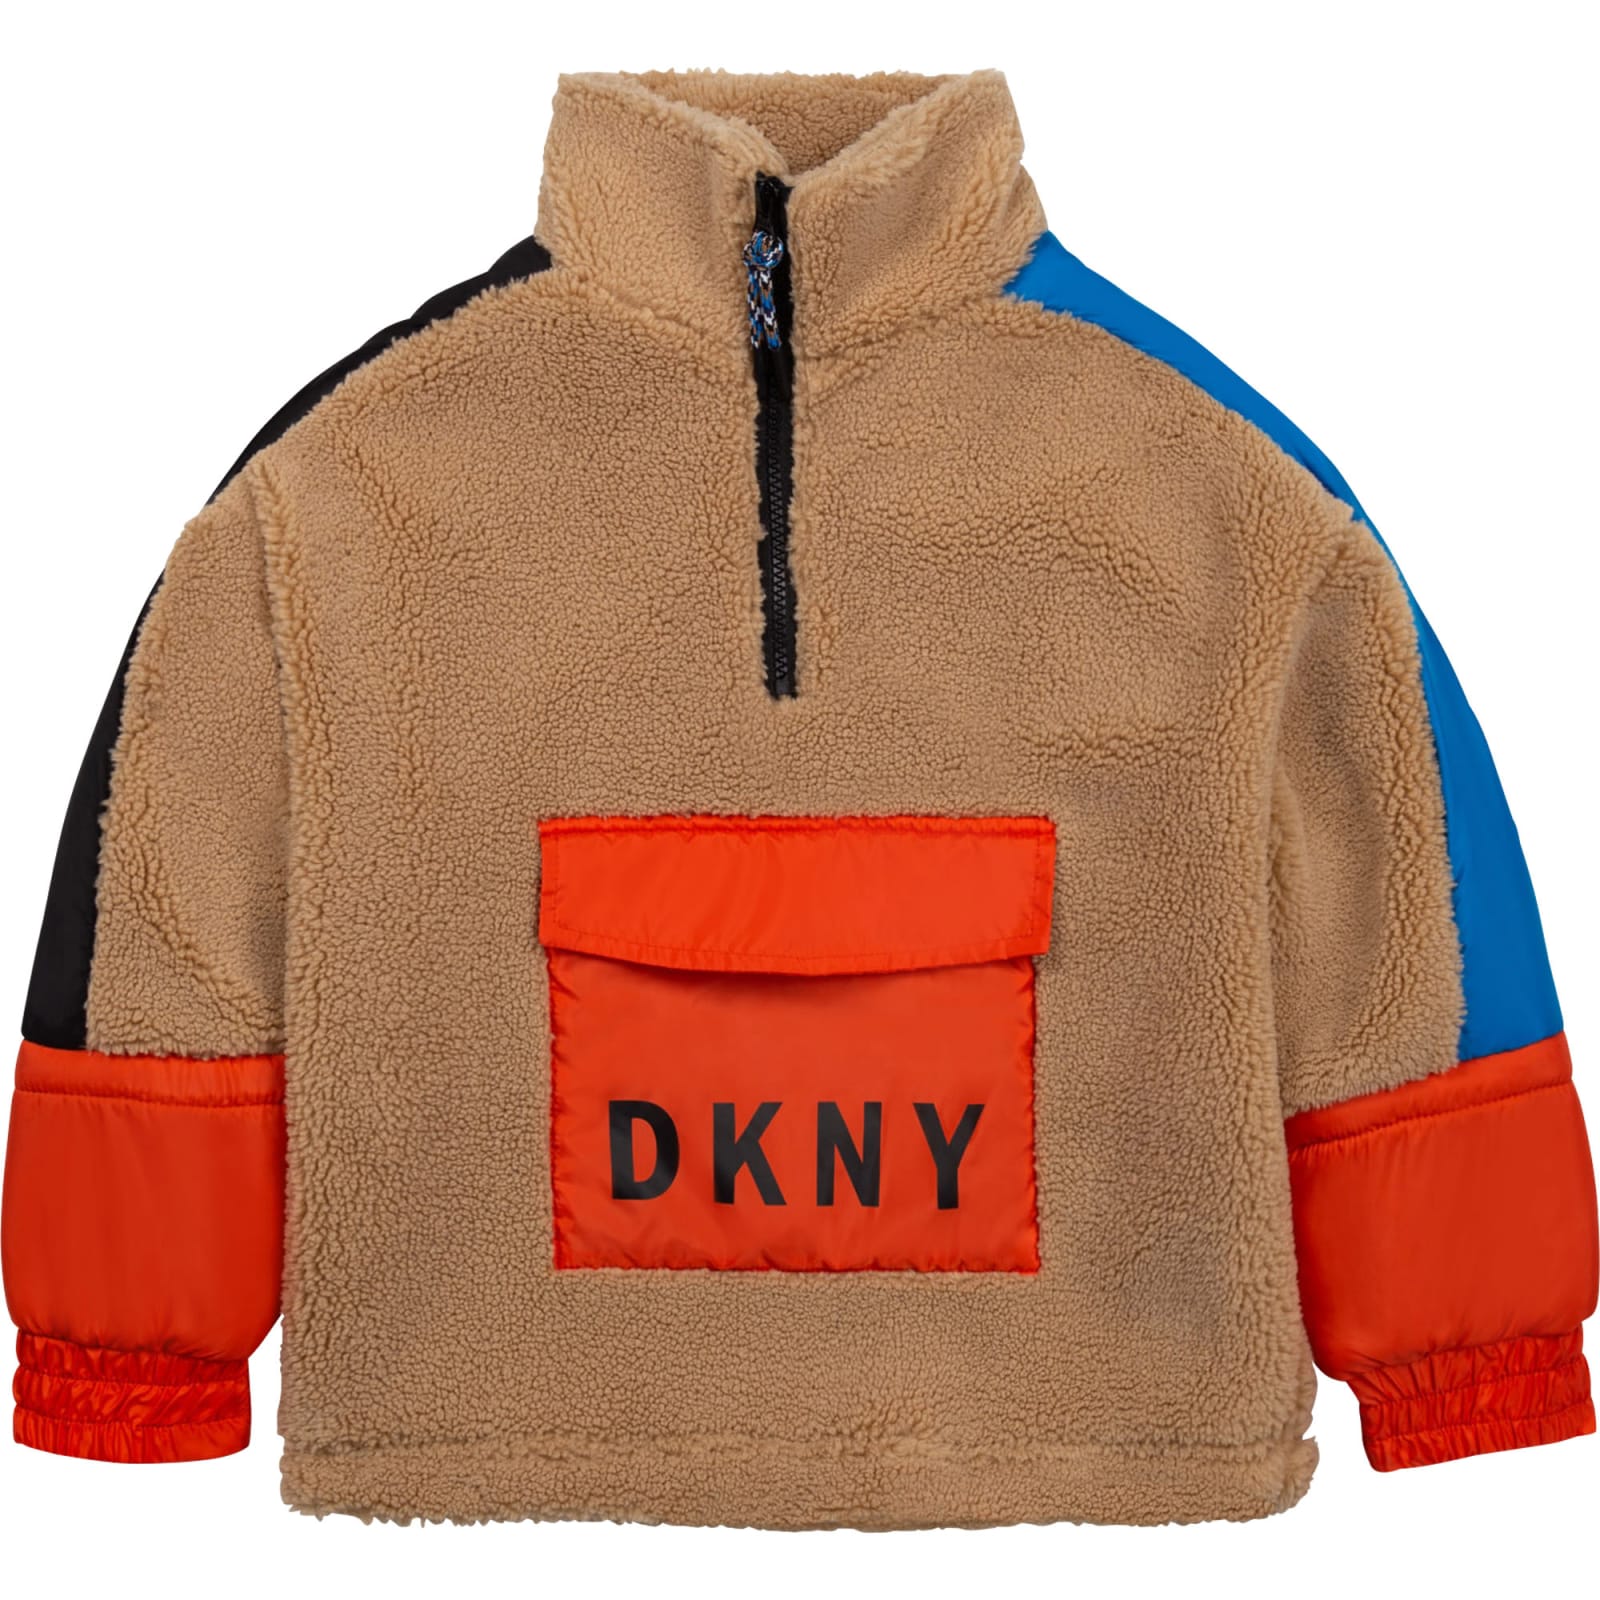 DKNY Sweatshirt Jacket With Contrasting Inserts